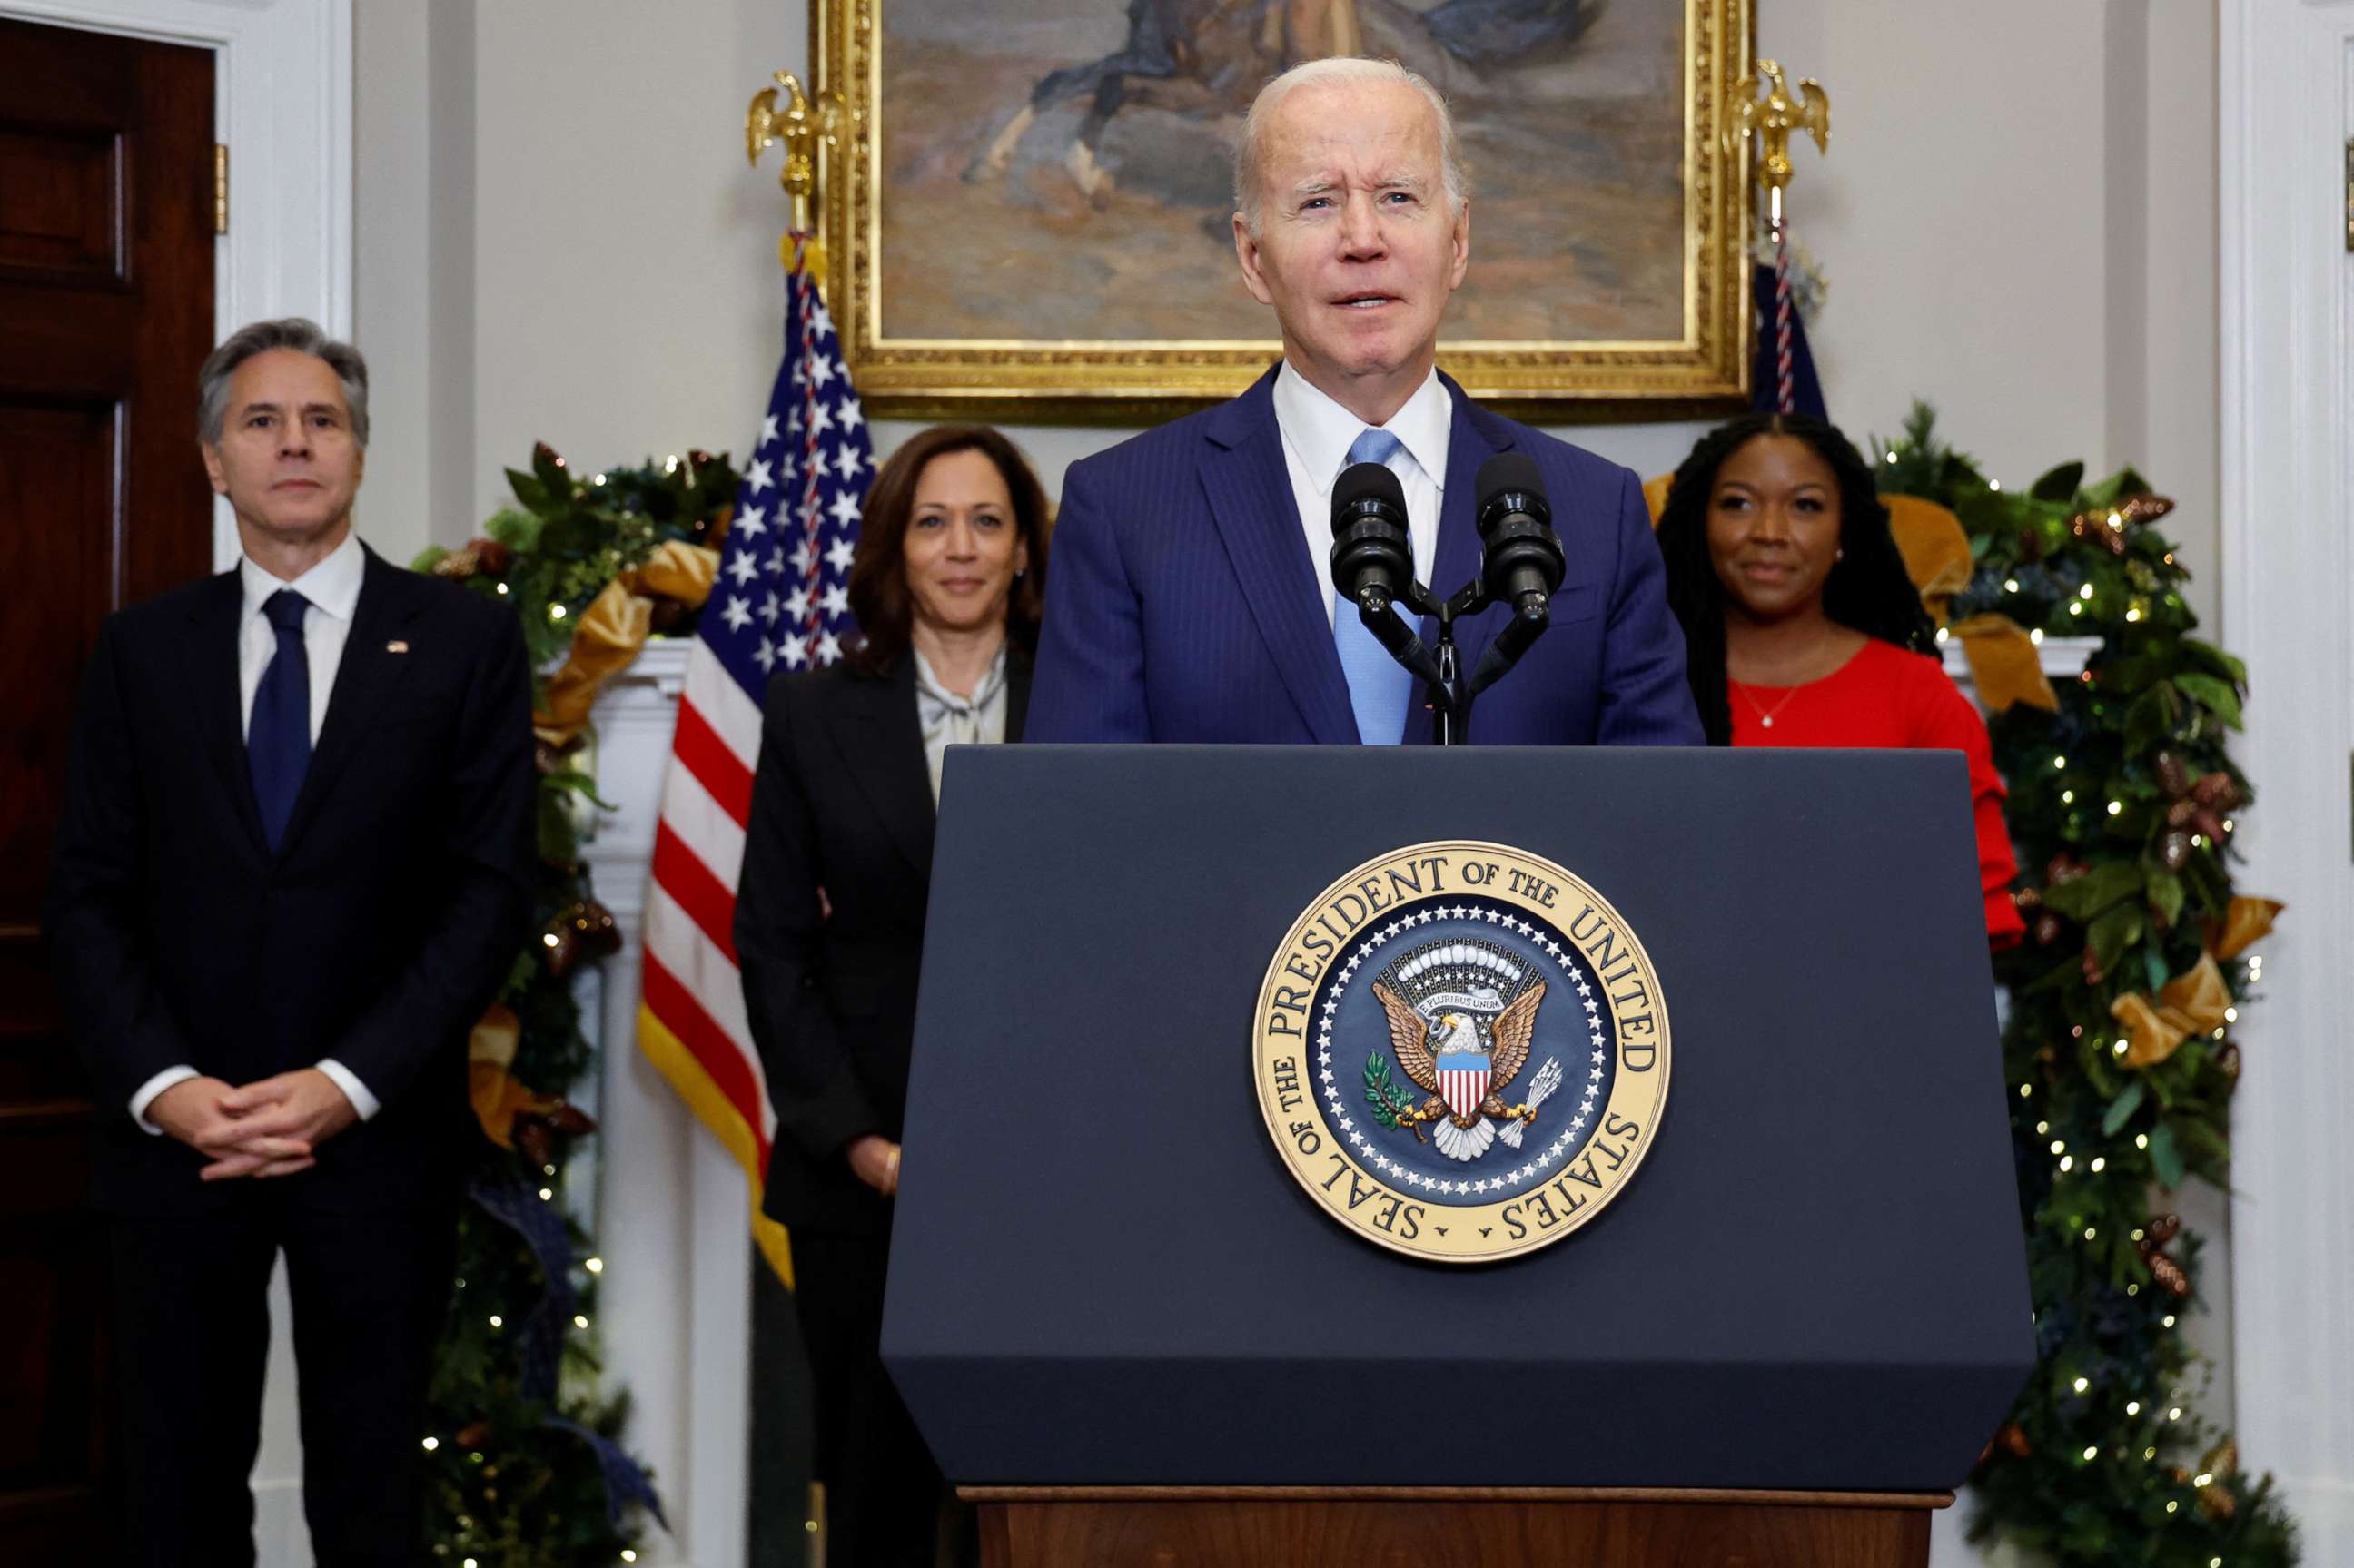 President Joe Biden speaks to reporters about the release of WNBA basketball star Brittney Griner by Russia as U.S. Secretary of State Antony Blinken, Vice President Kamala Harris and Cherelle Griner look the White House in Washington, Dec. 8, 2022.